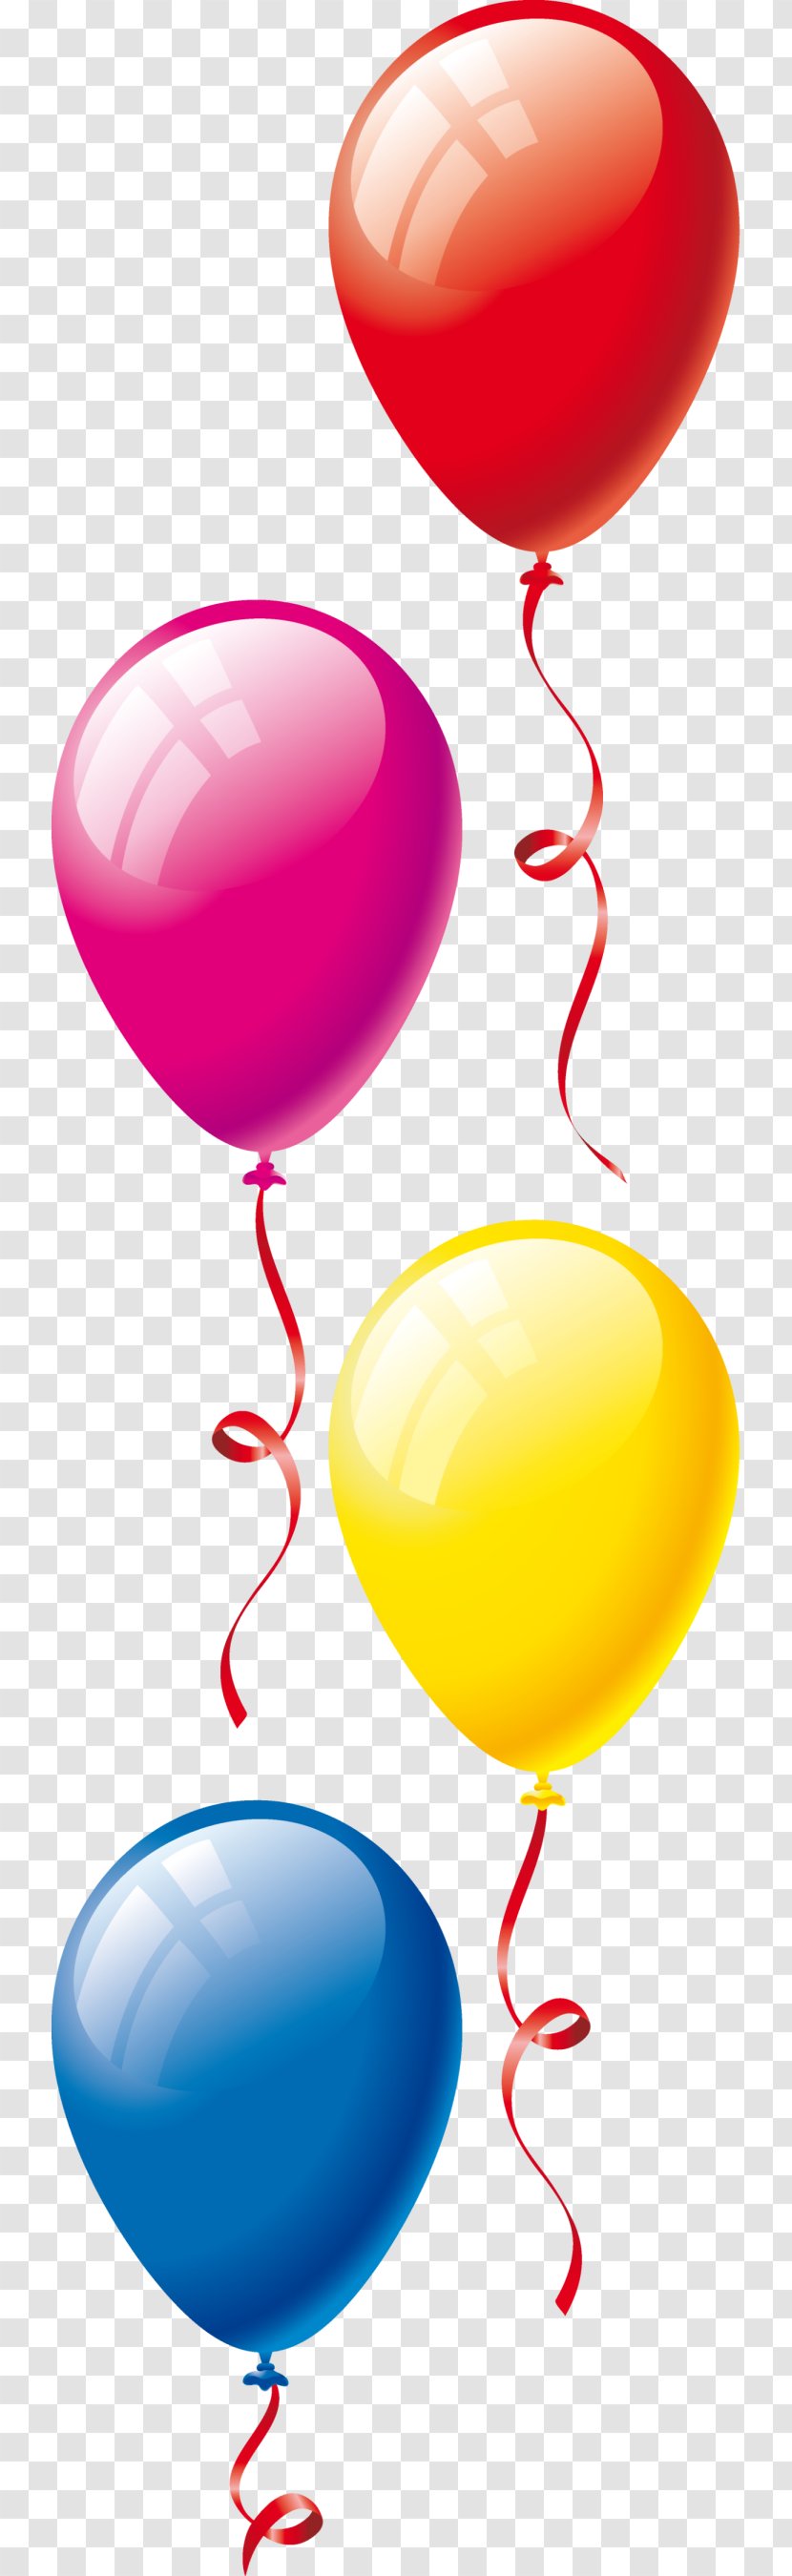 Toy Balloon Birthday Party Clip Art - Happy To You - Ballons Transparent PNG